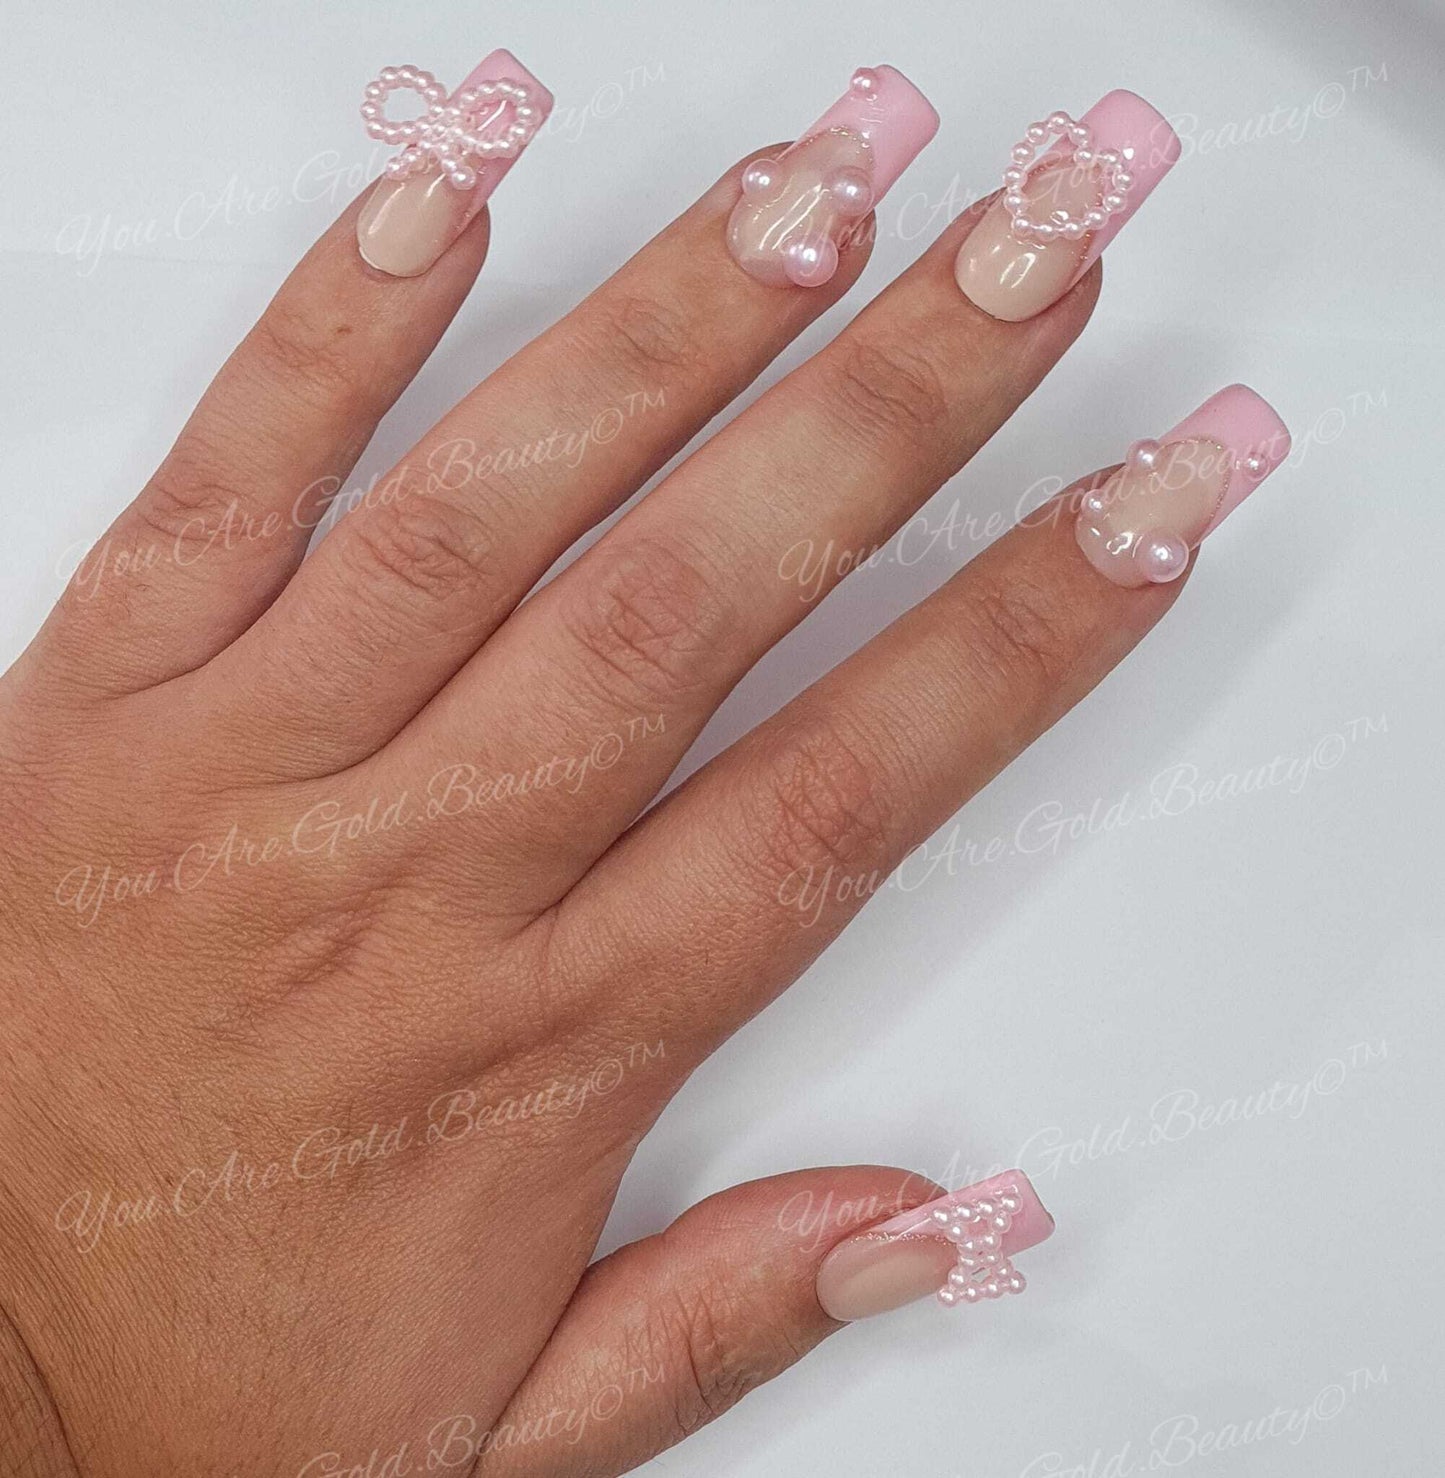 pearl nail designs pink press on nails french tip nails with glitter